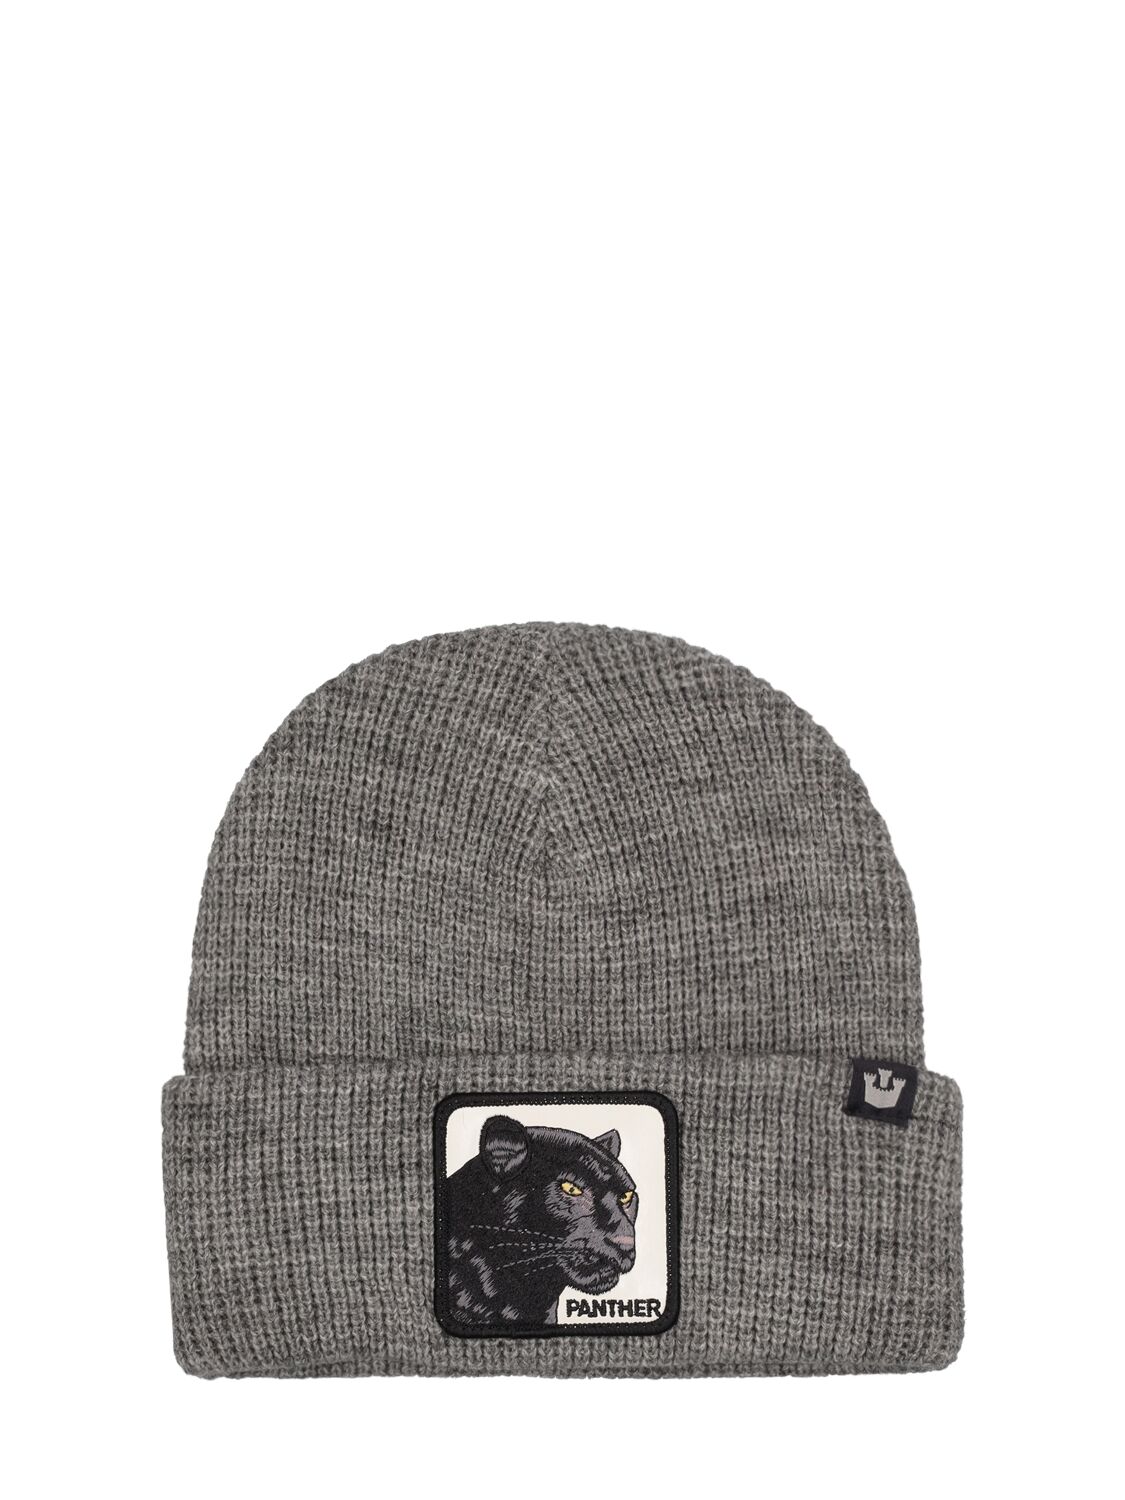 Panther Vision Knit Beanie